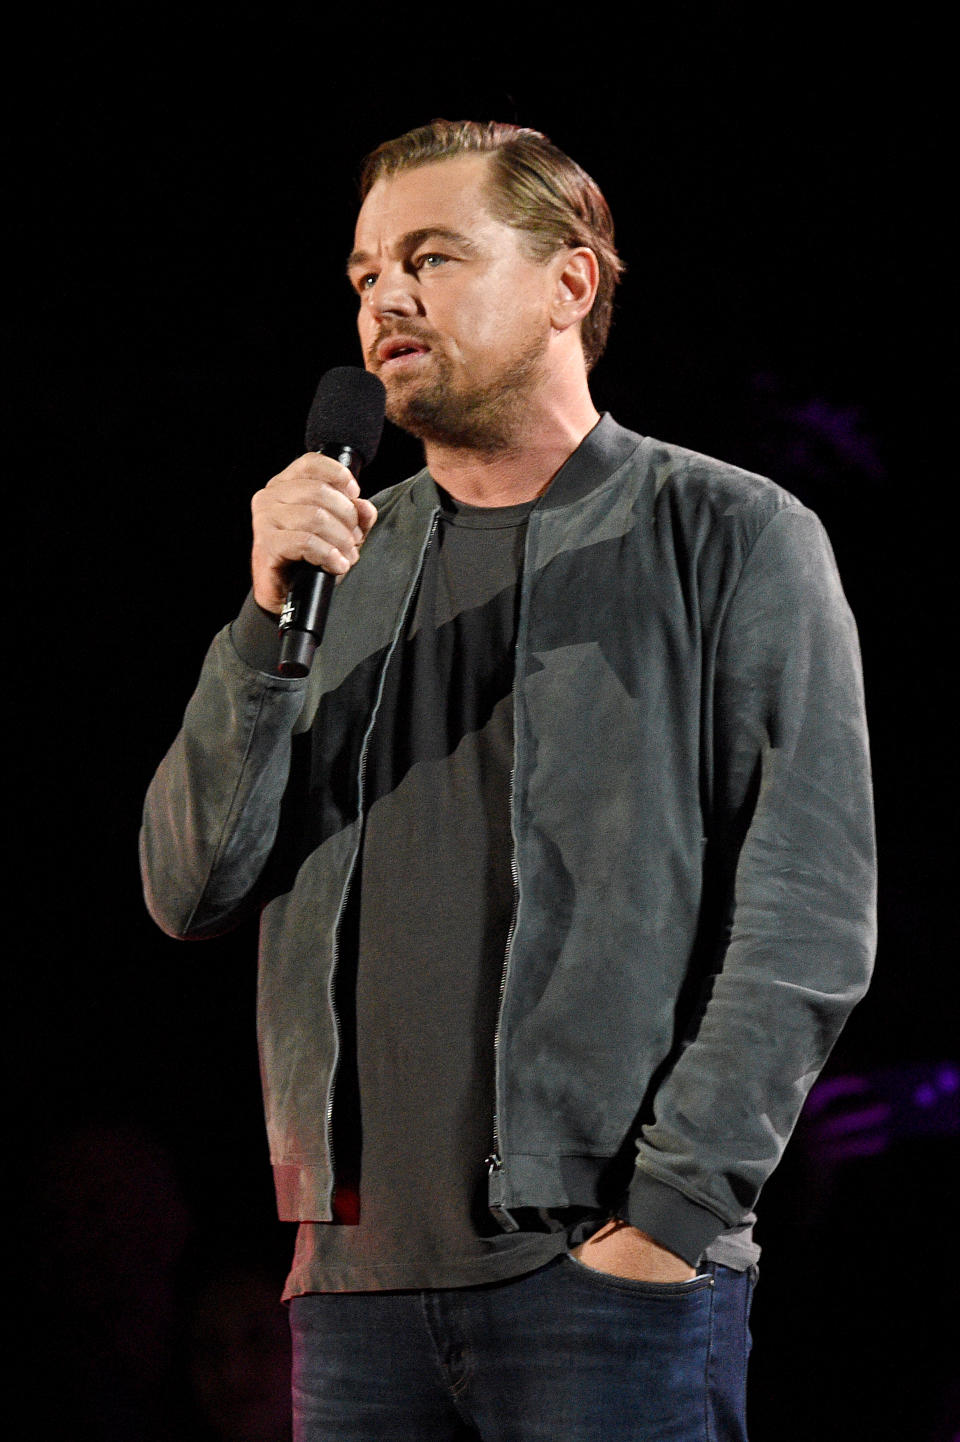 NEW YORK, NEW YORK - SEPTEMBER 28: Leonardo DiCaprio speaks onstage during the 2019 Global Citizen Festival: Power The Movement in Central Park on September 28, 2019 in New York City. (Photo by Kevin Mazur/Getty Images for Global Citizen)